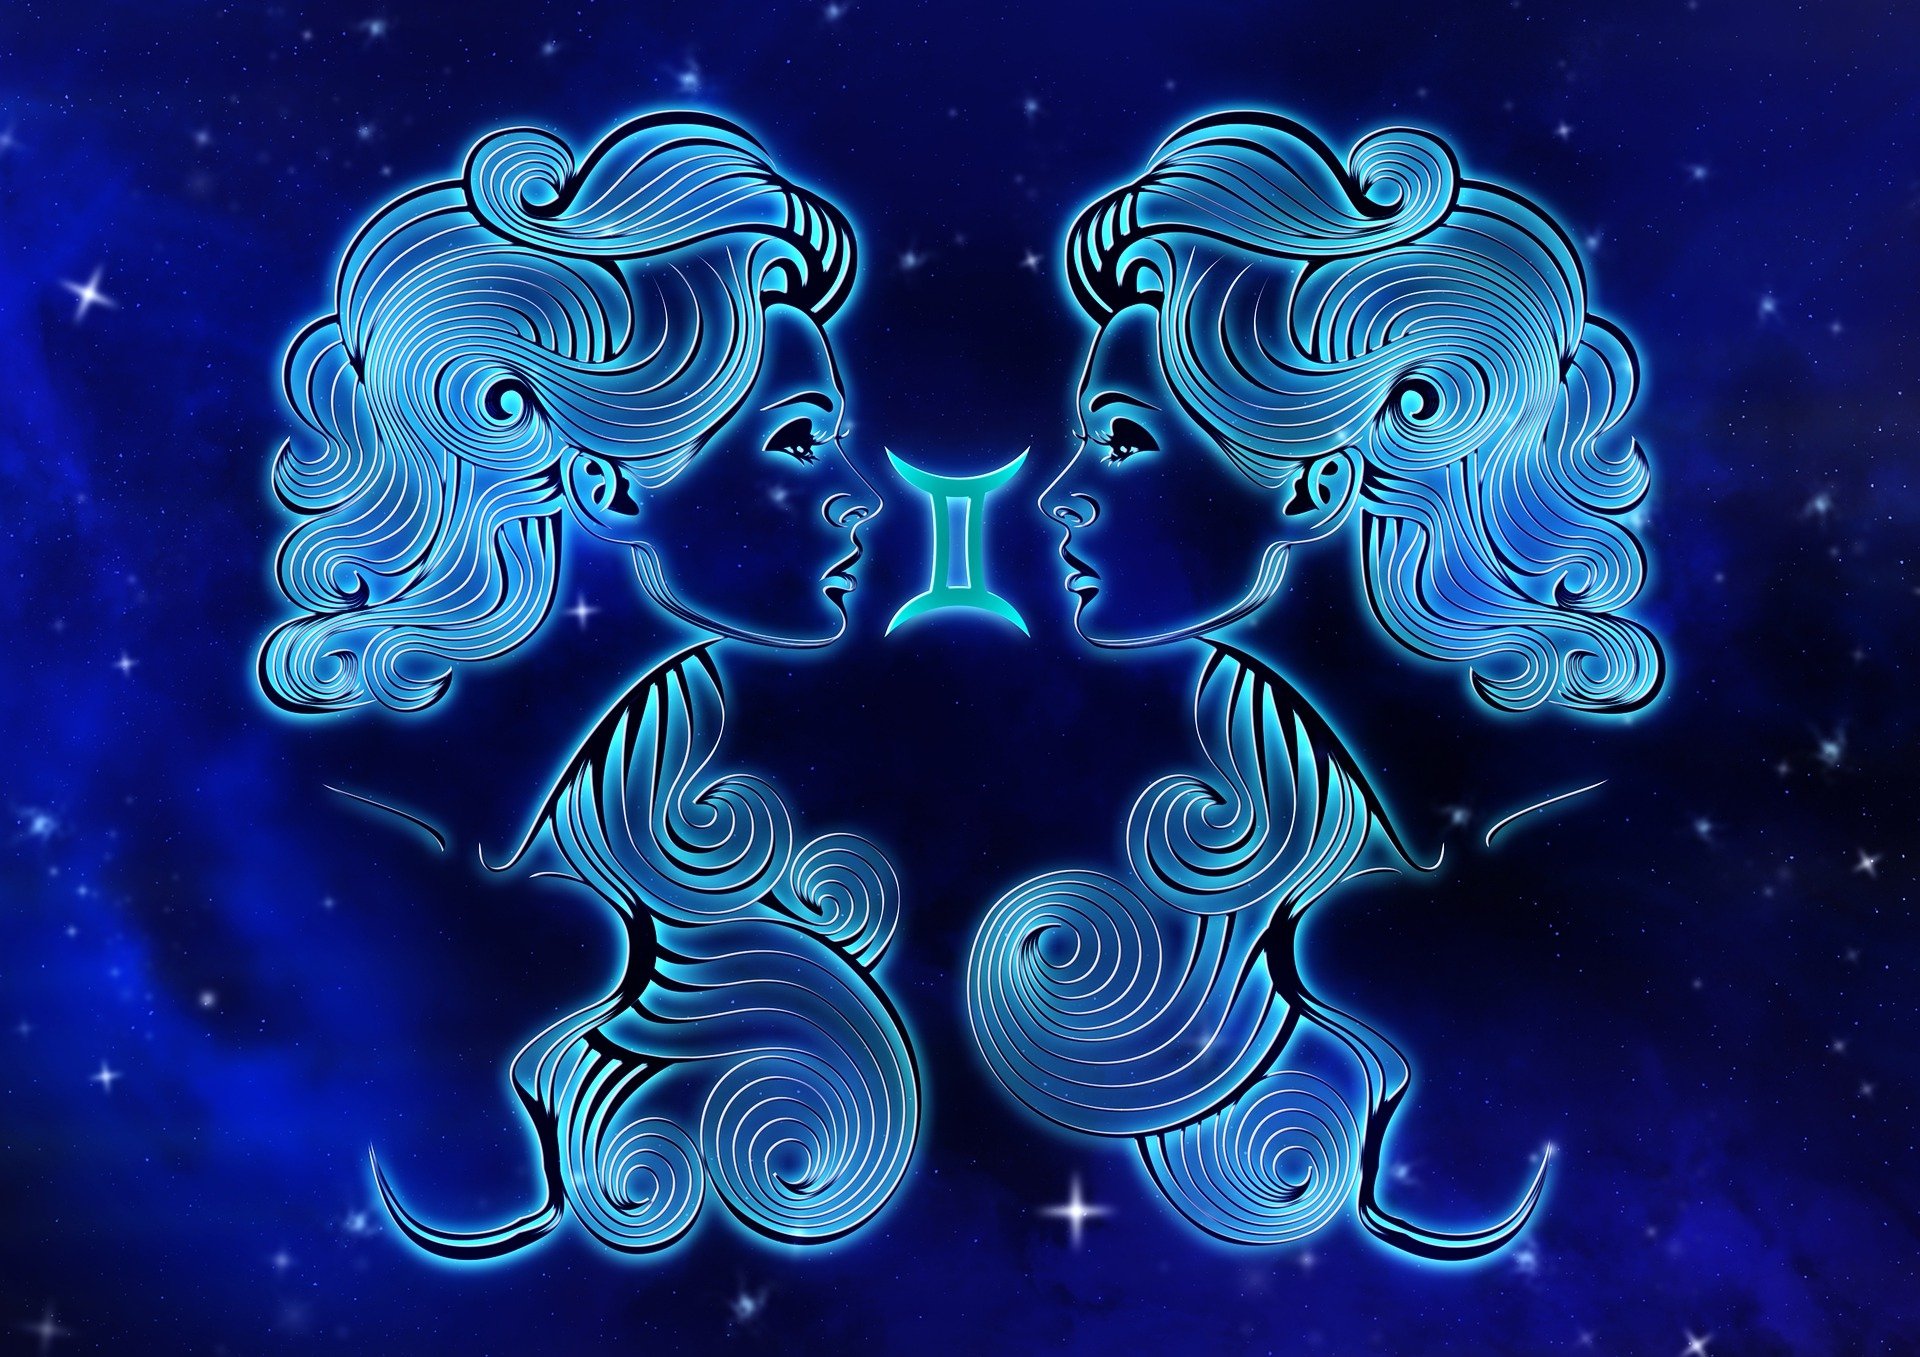 Gemini (Astrology) HD Wallpapers and Backgrounds